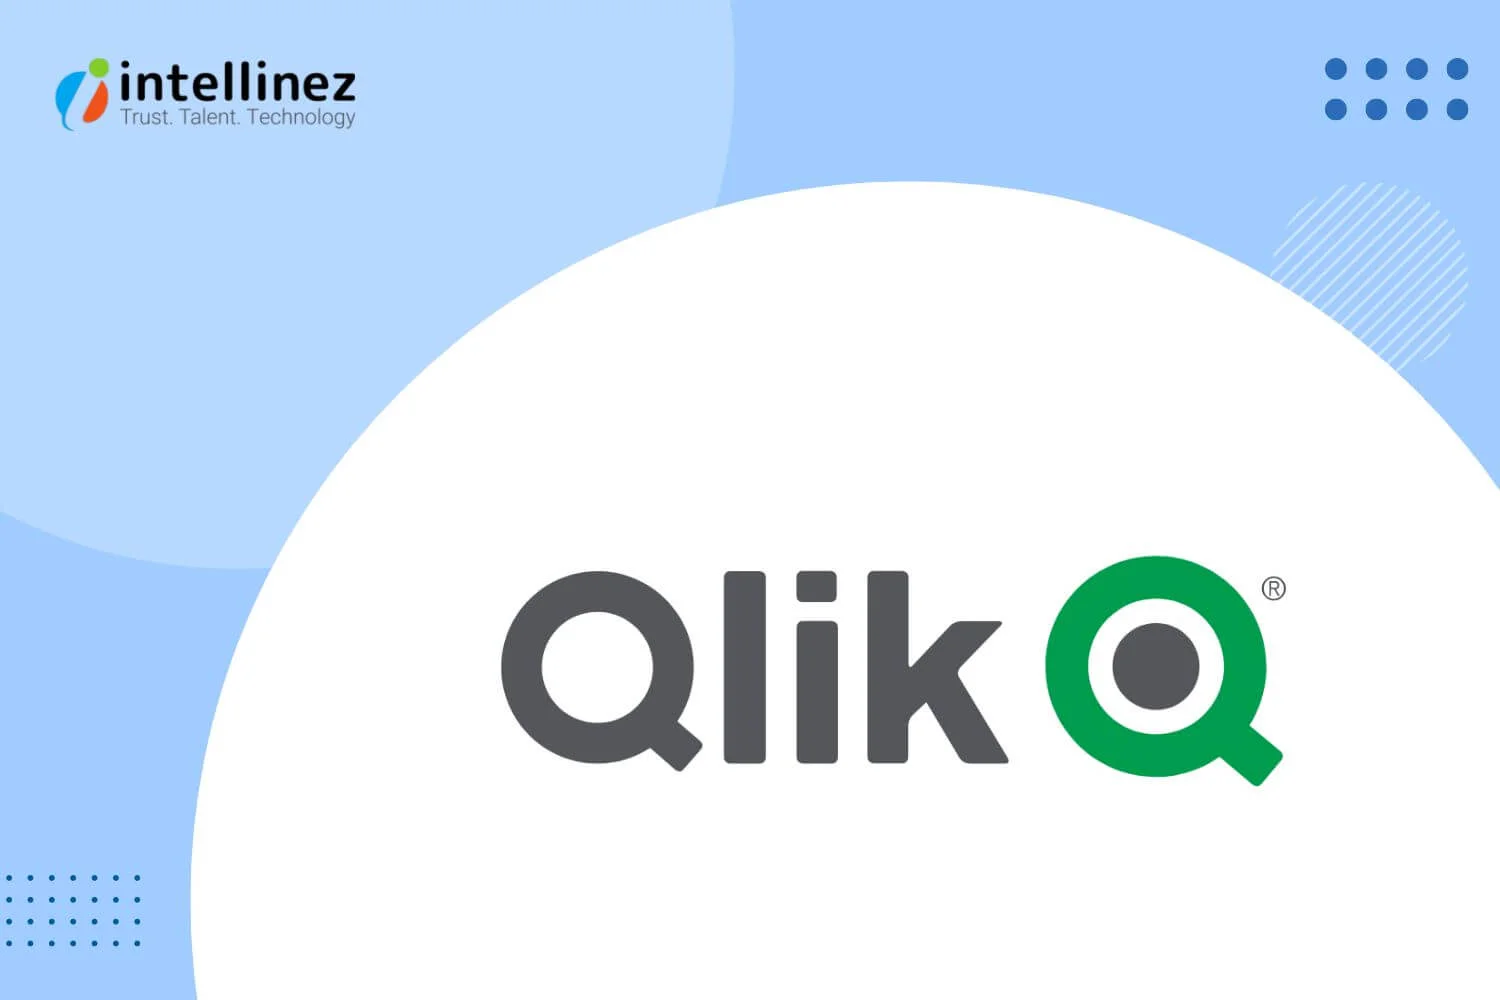 Qlikview - The Best Machine Learning Tool